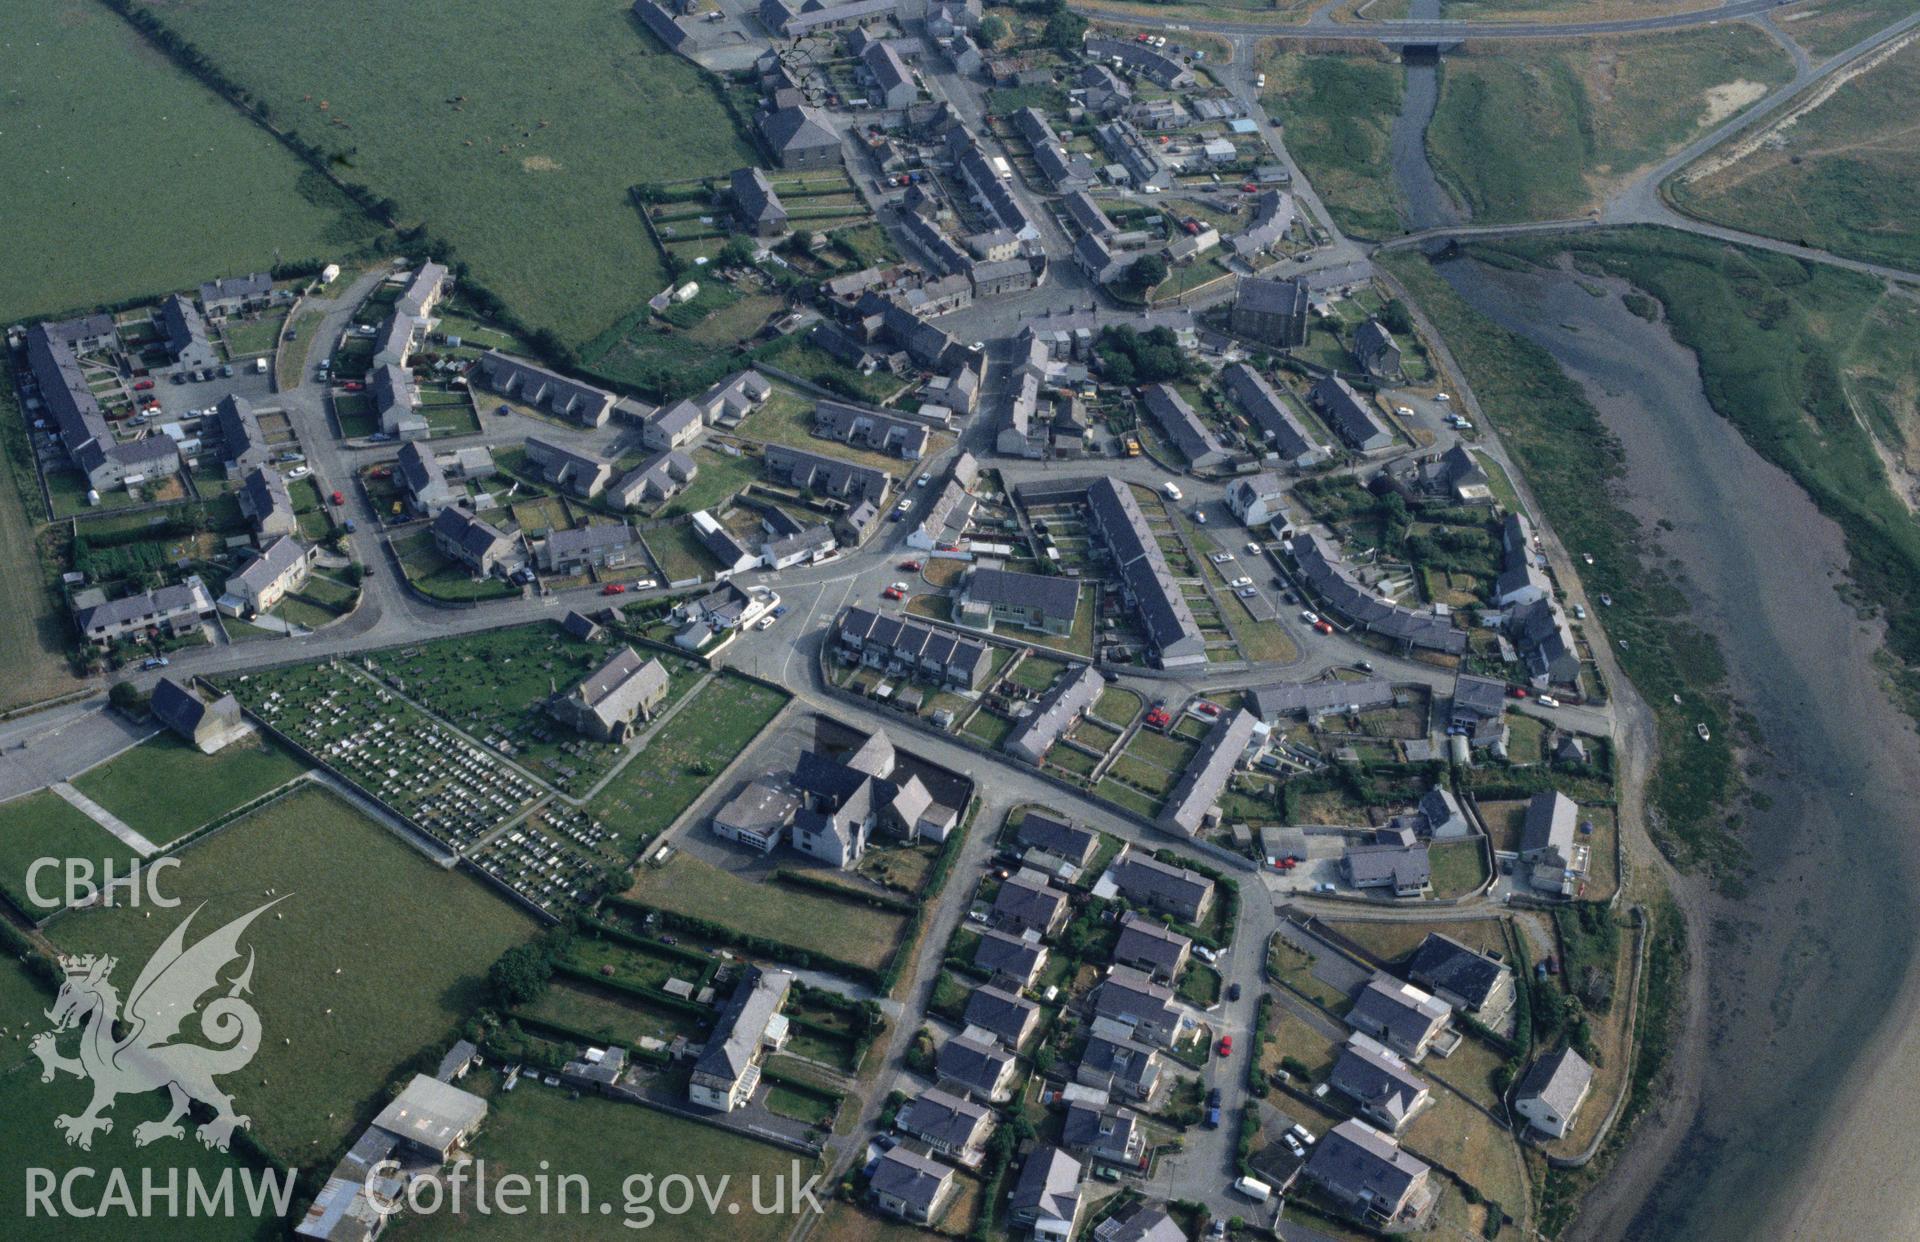 Slide of RCAHMW colour oblique aerial photograph of Aberffraw, taken by C.R. Musson, 9/7/1995.